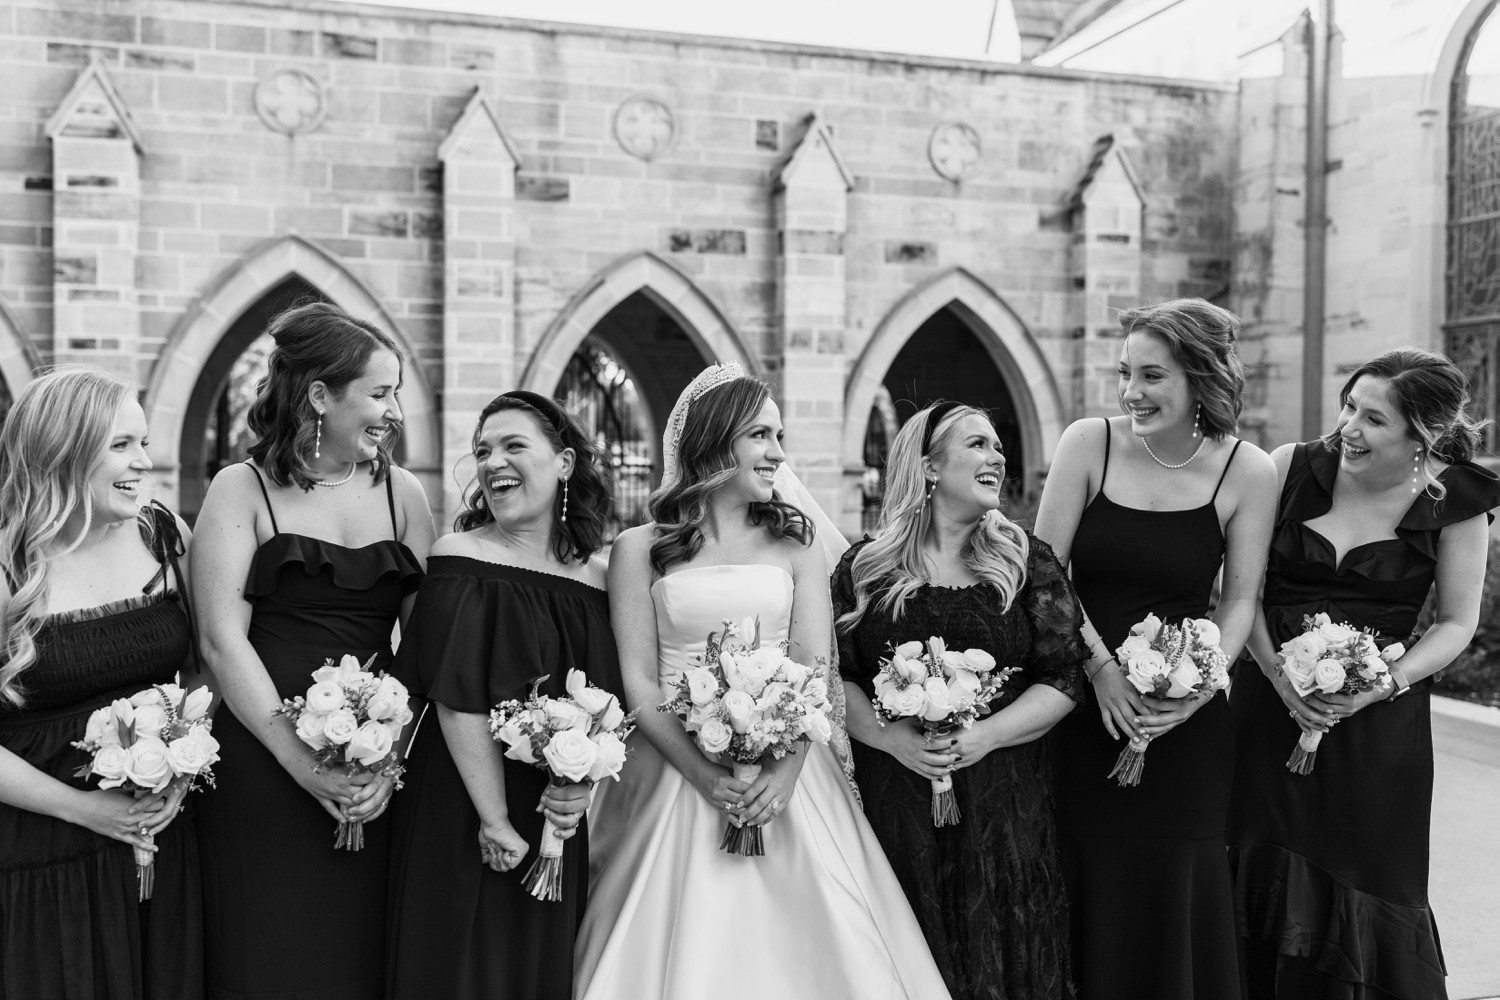 Bride and bridesmaids smiling at each other.